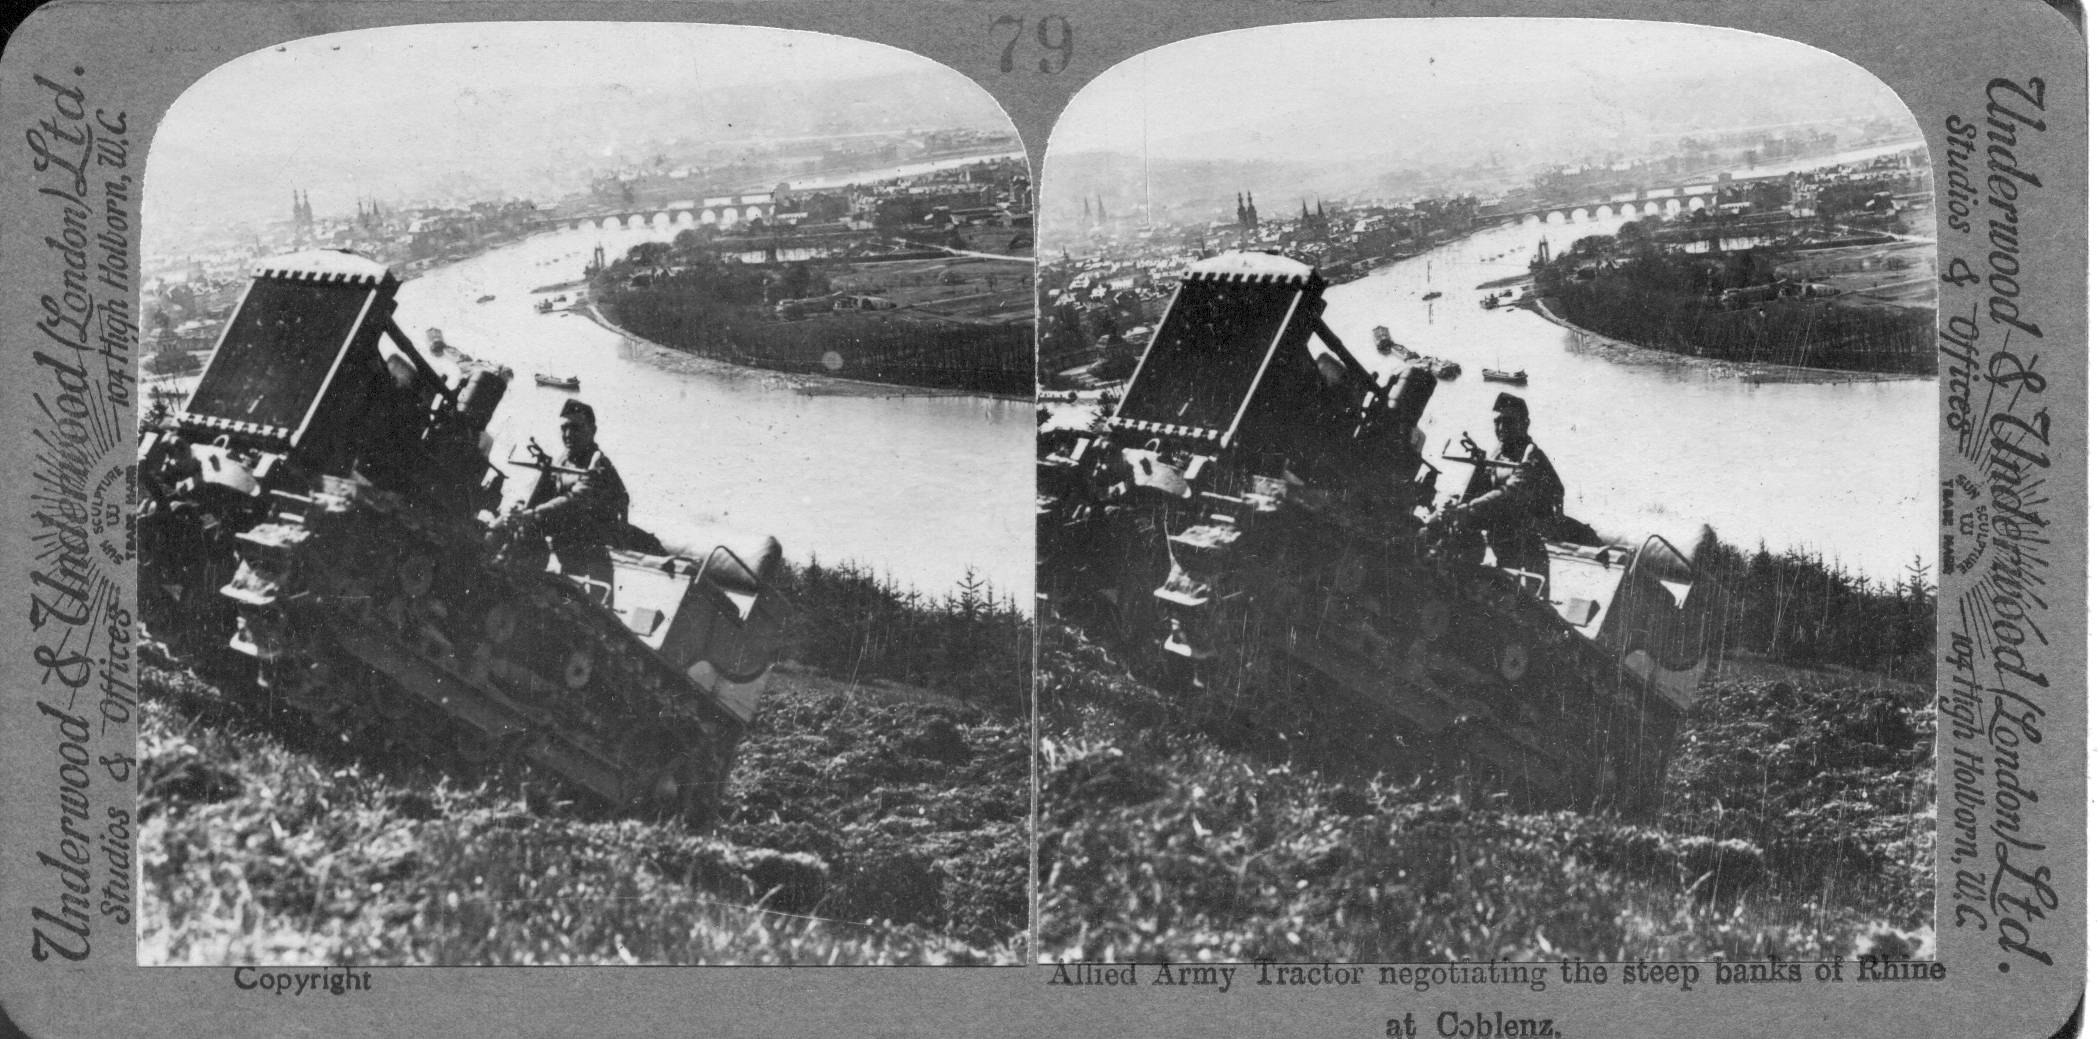 Allied Army Tractor negotiating the steep banks of Rhine at Coblenz